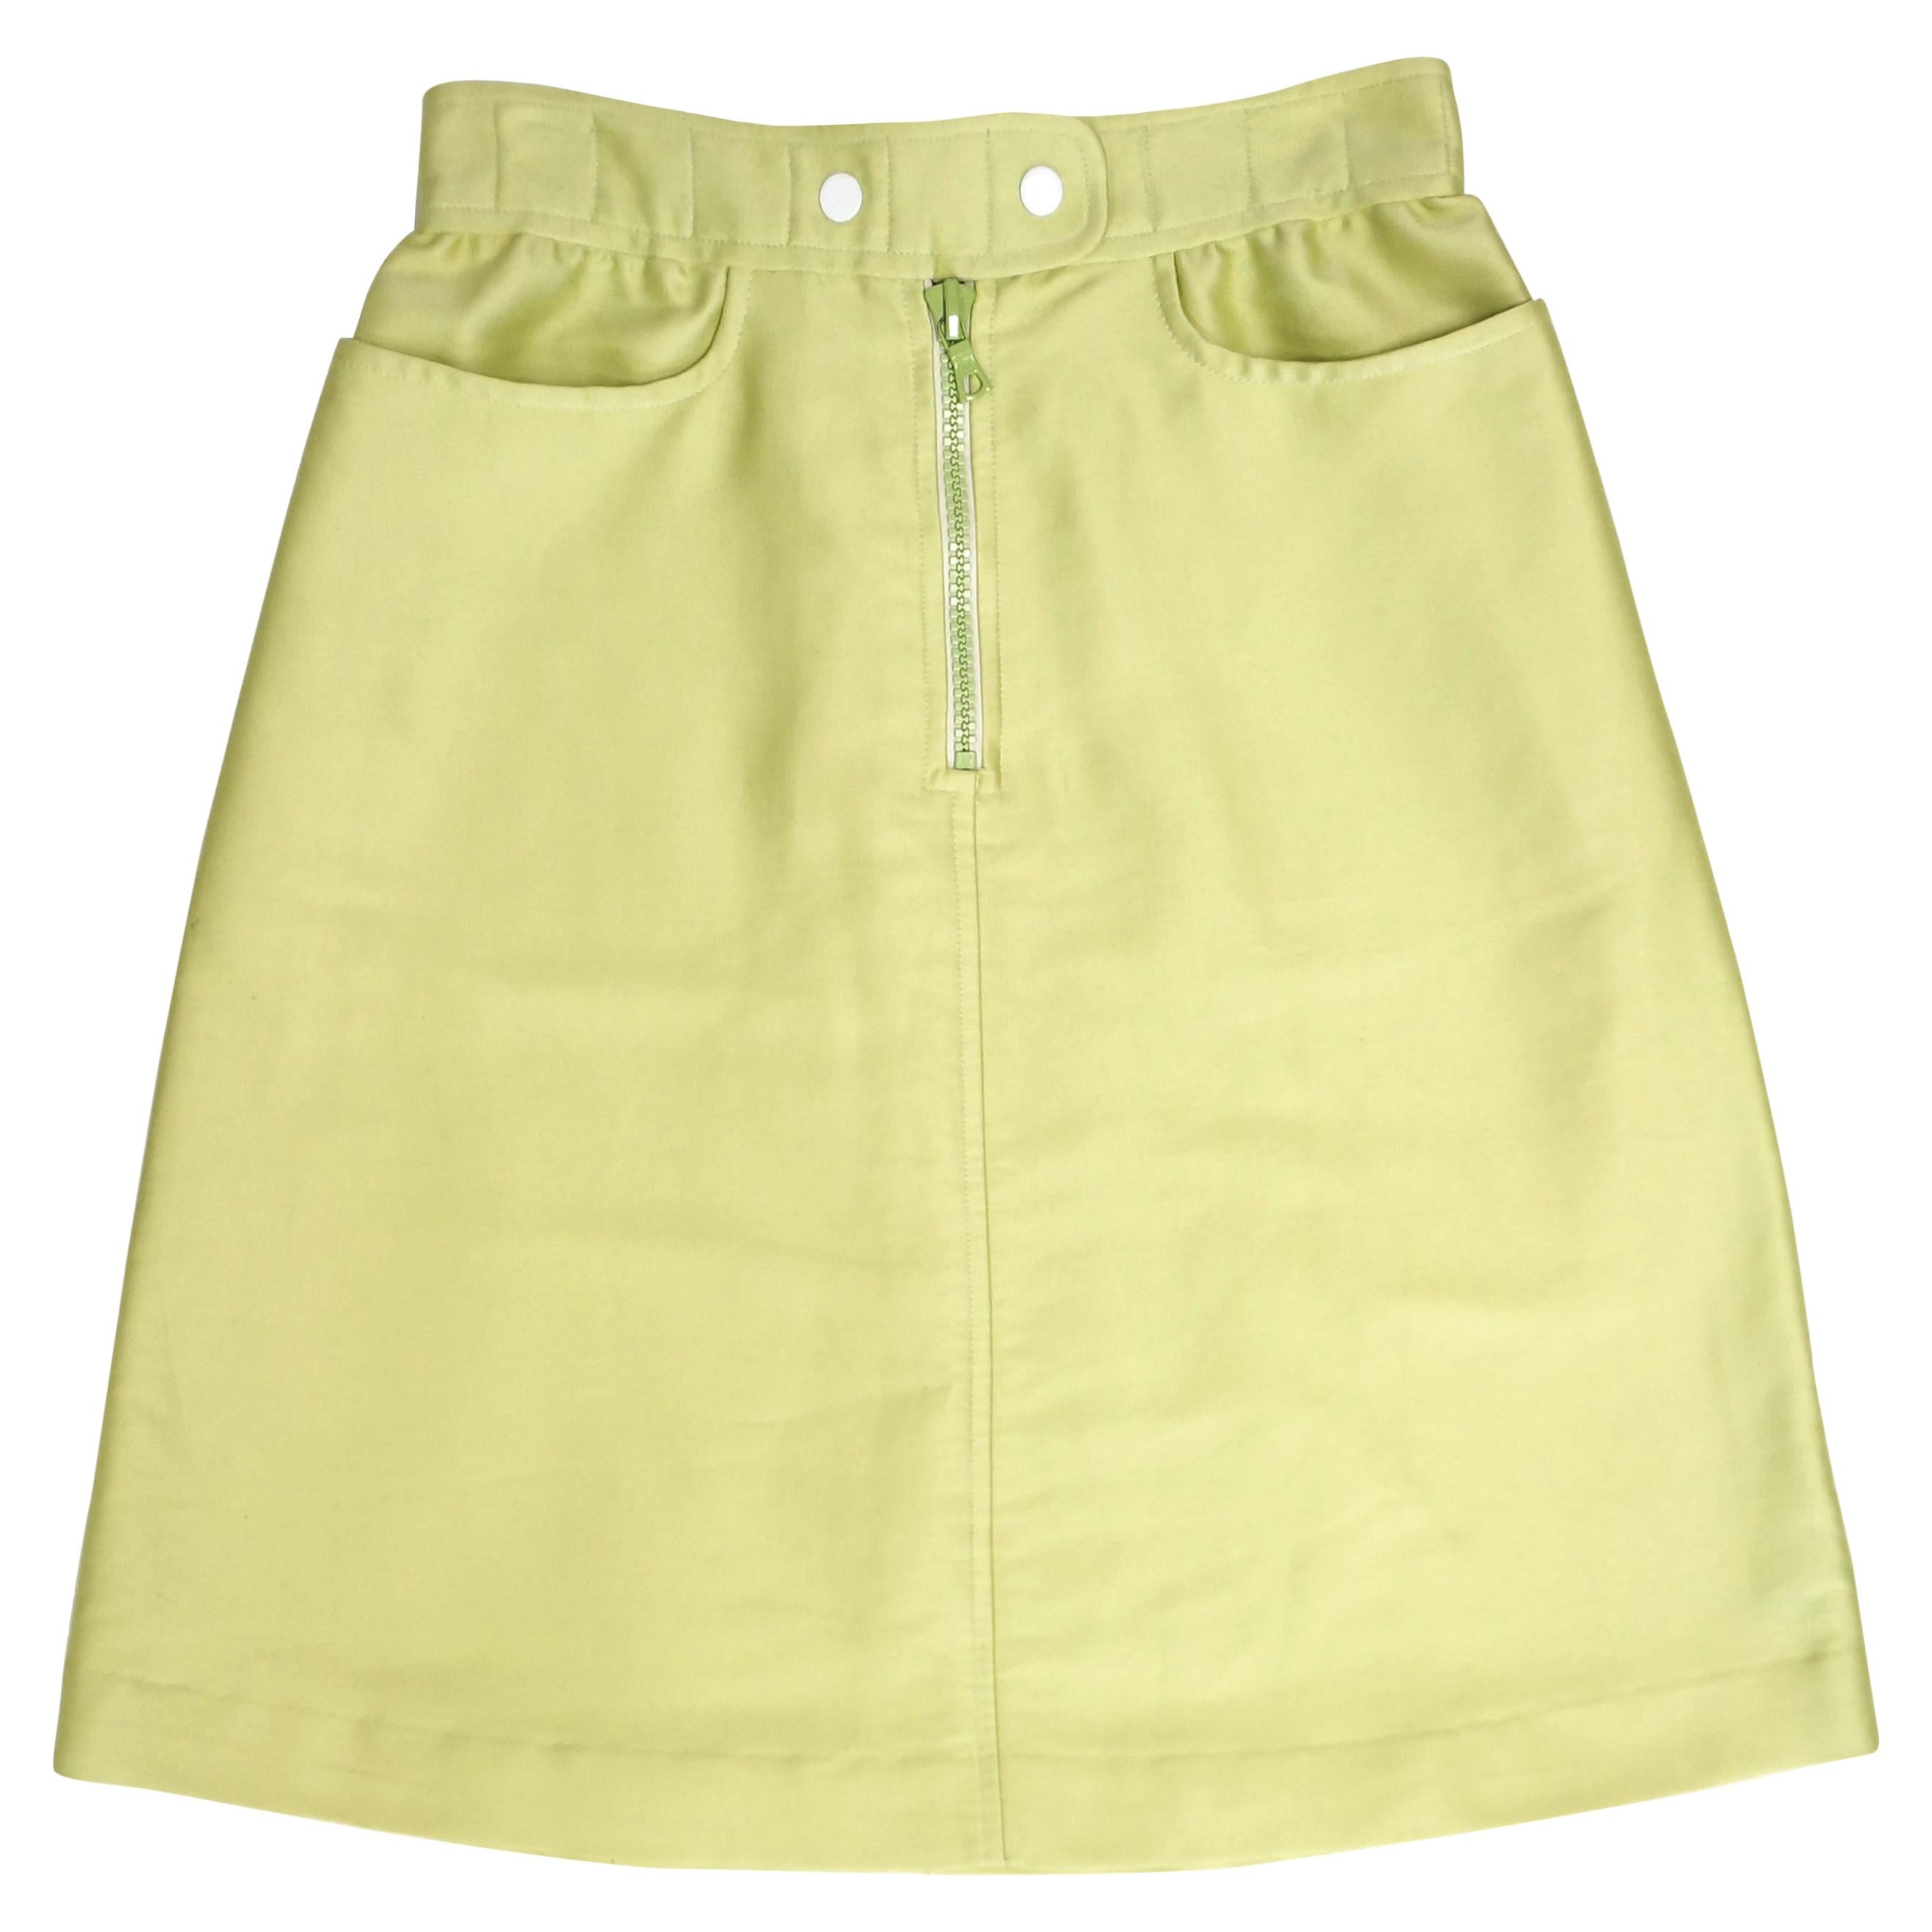 1990s Courreges Green Mod Mini Skirt with White Accent Zipper